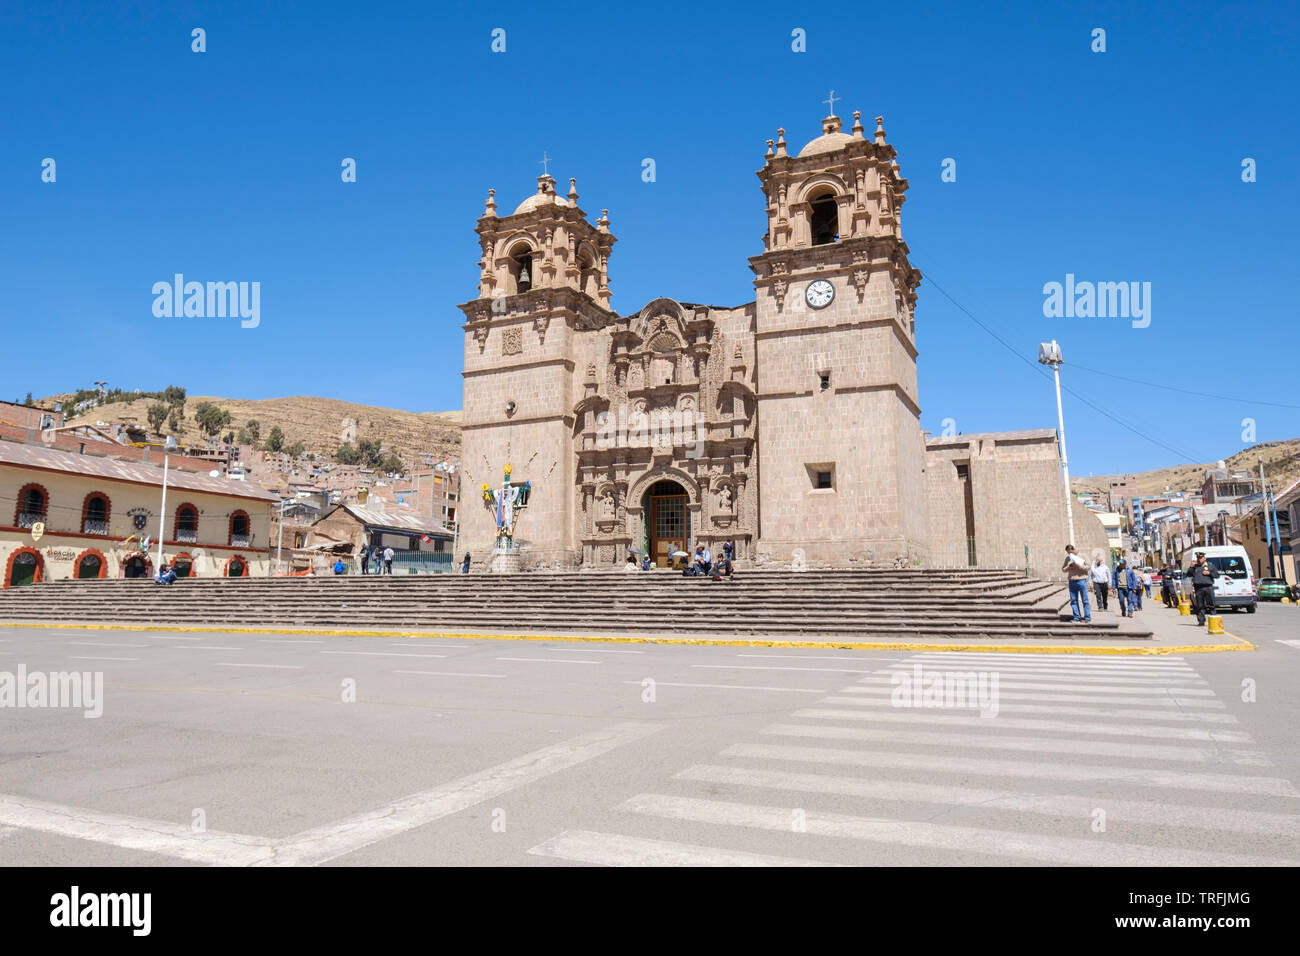 Scenic view of the Puno Cathedral on a sunny day in Puno, Puno Region, Peru Stock Photo